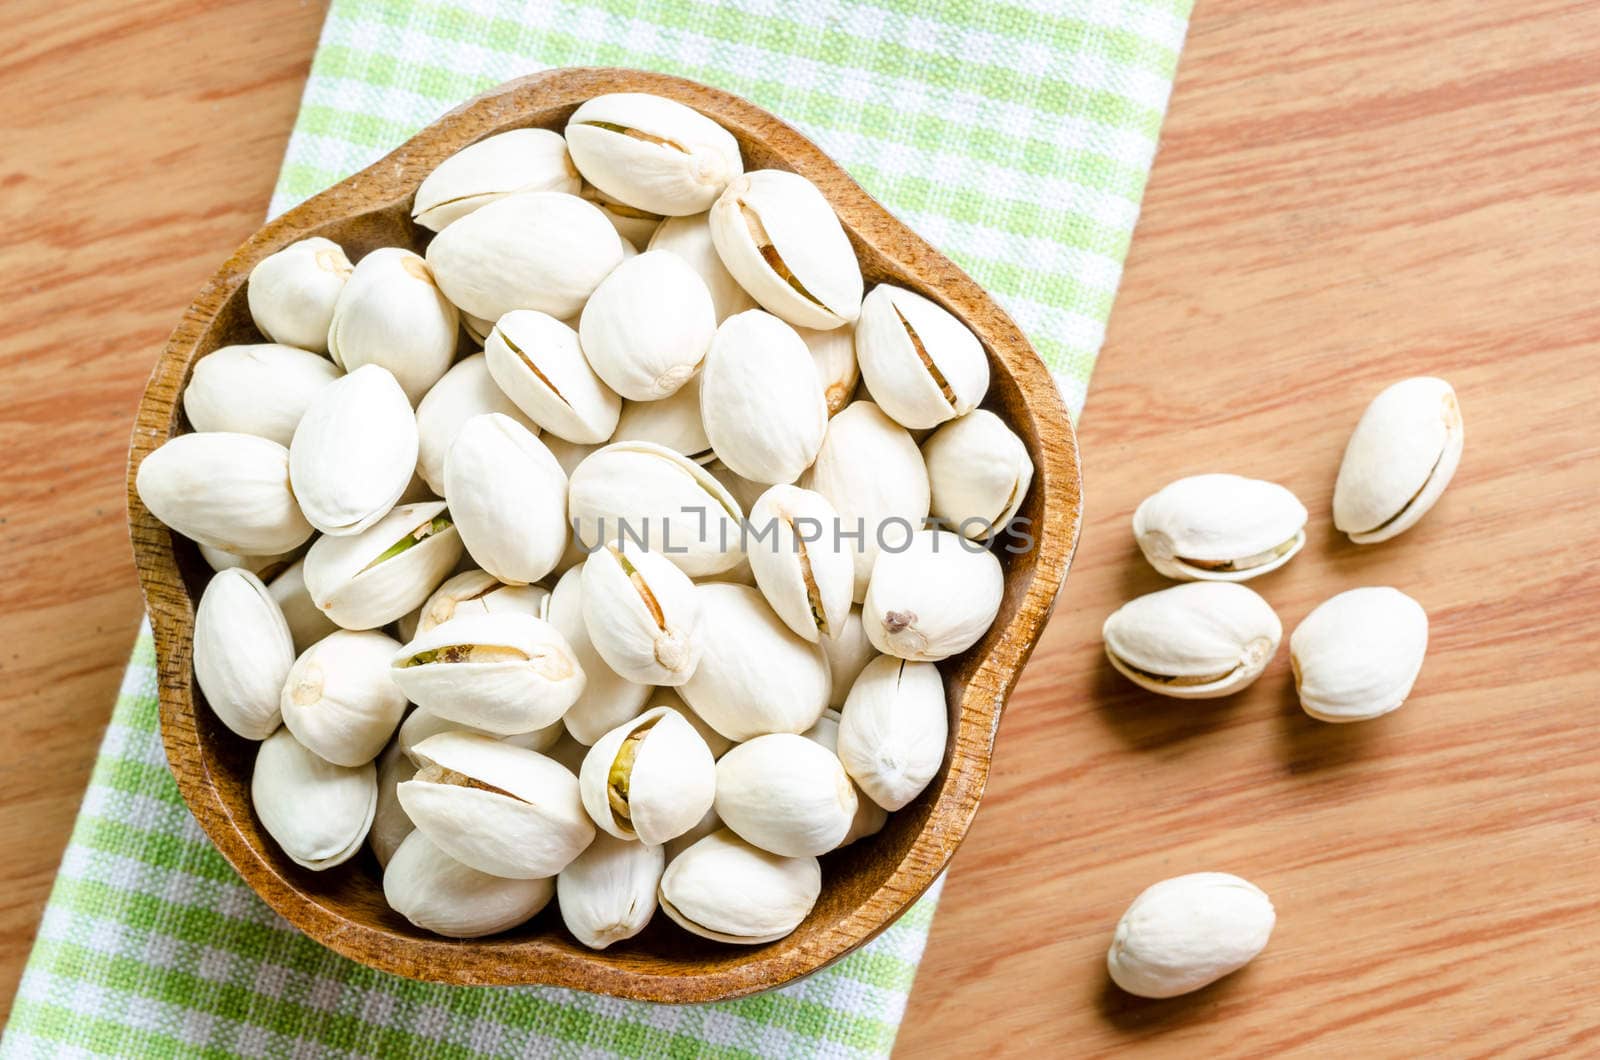 Pistachio nuts in wooden bowl on tablecloth and wooden background.